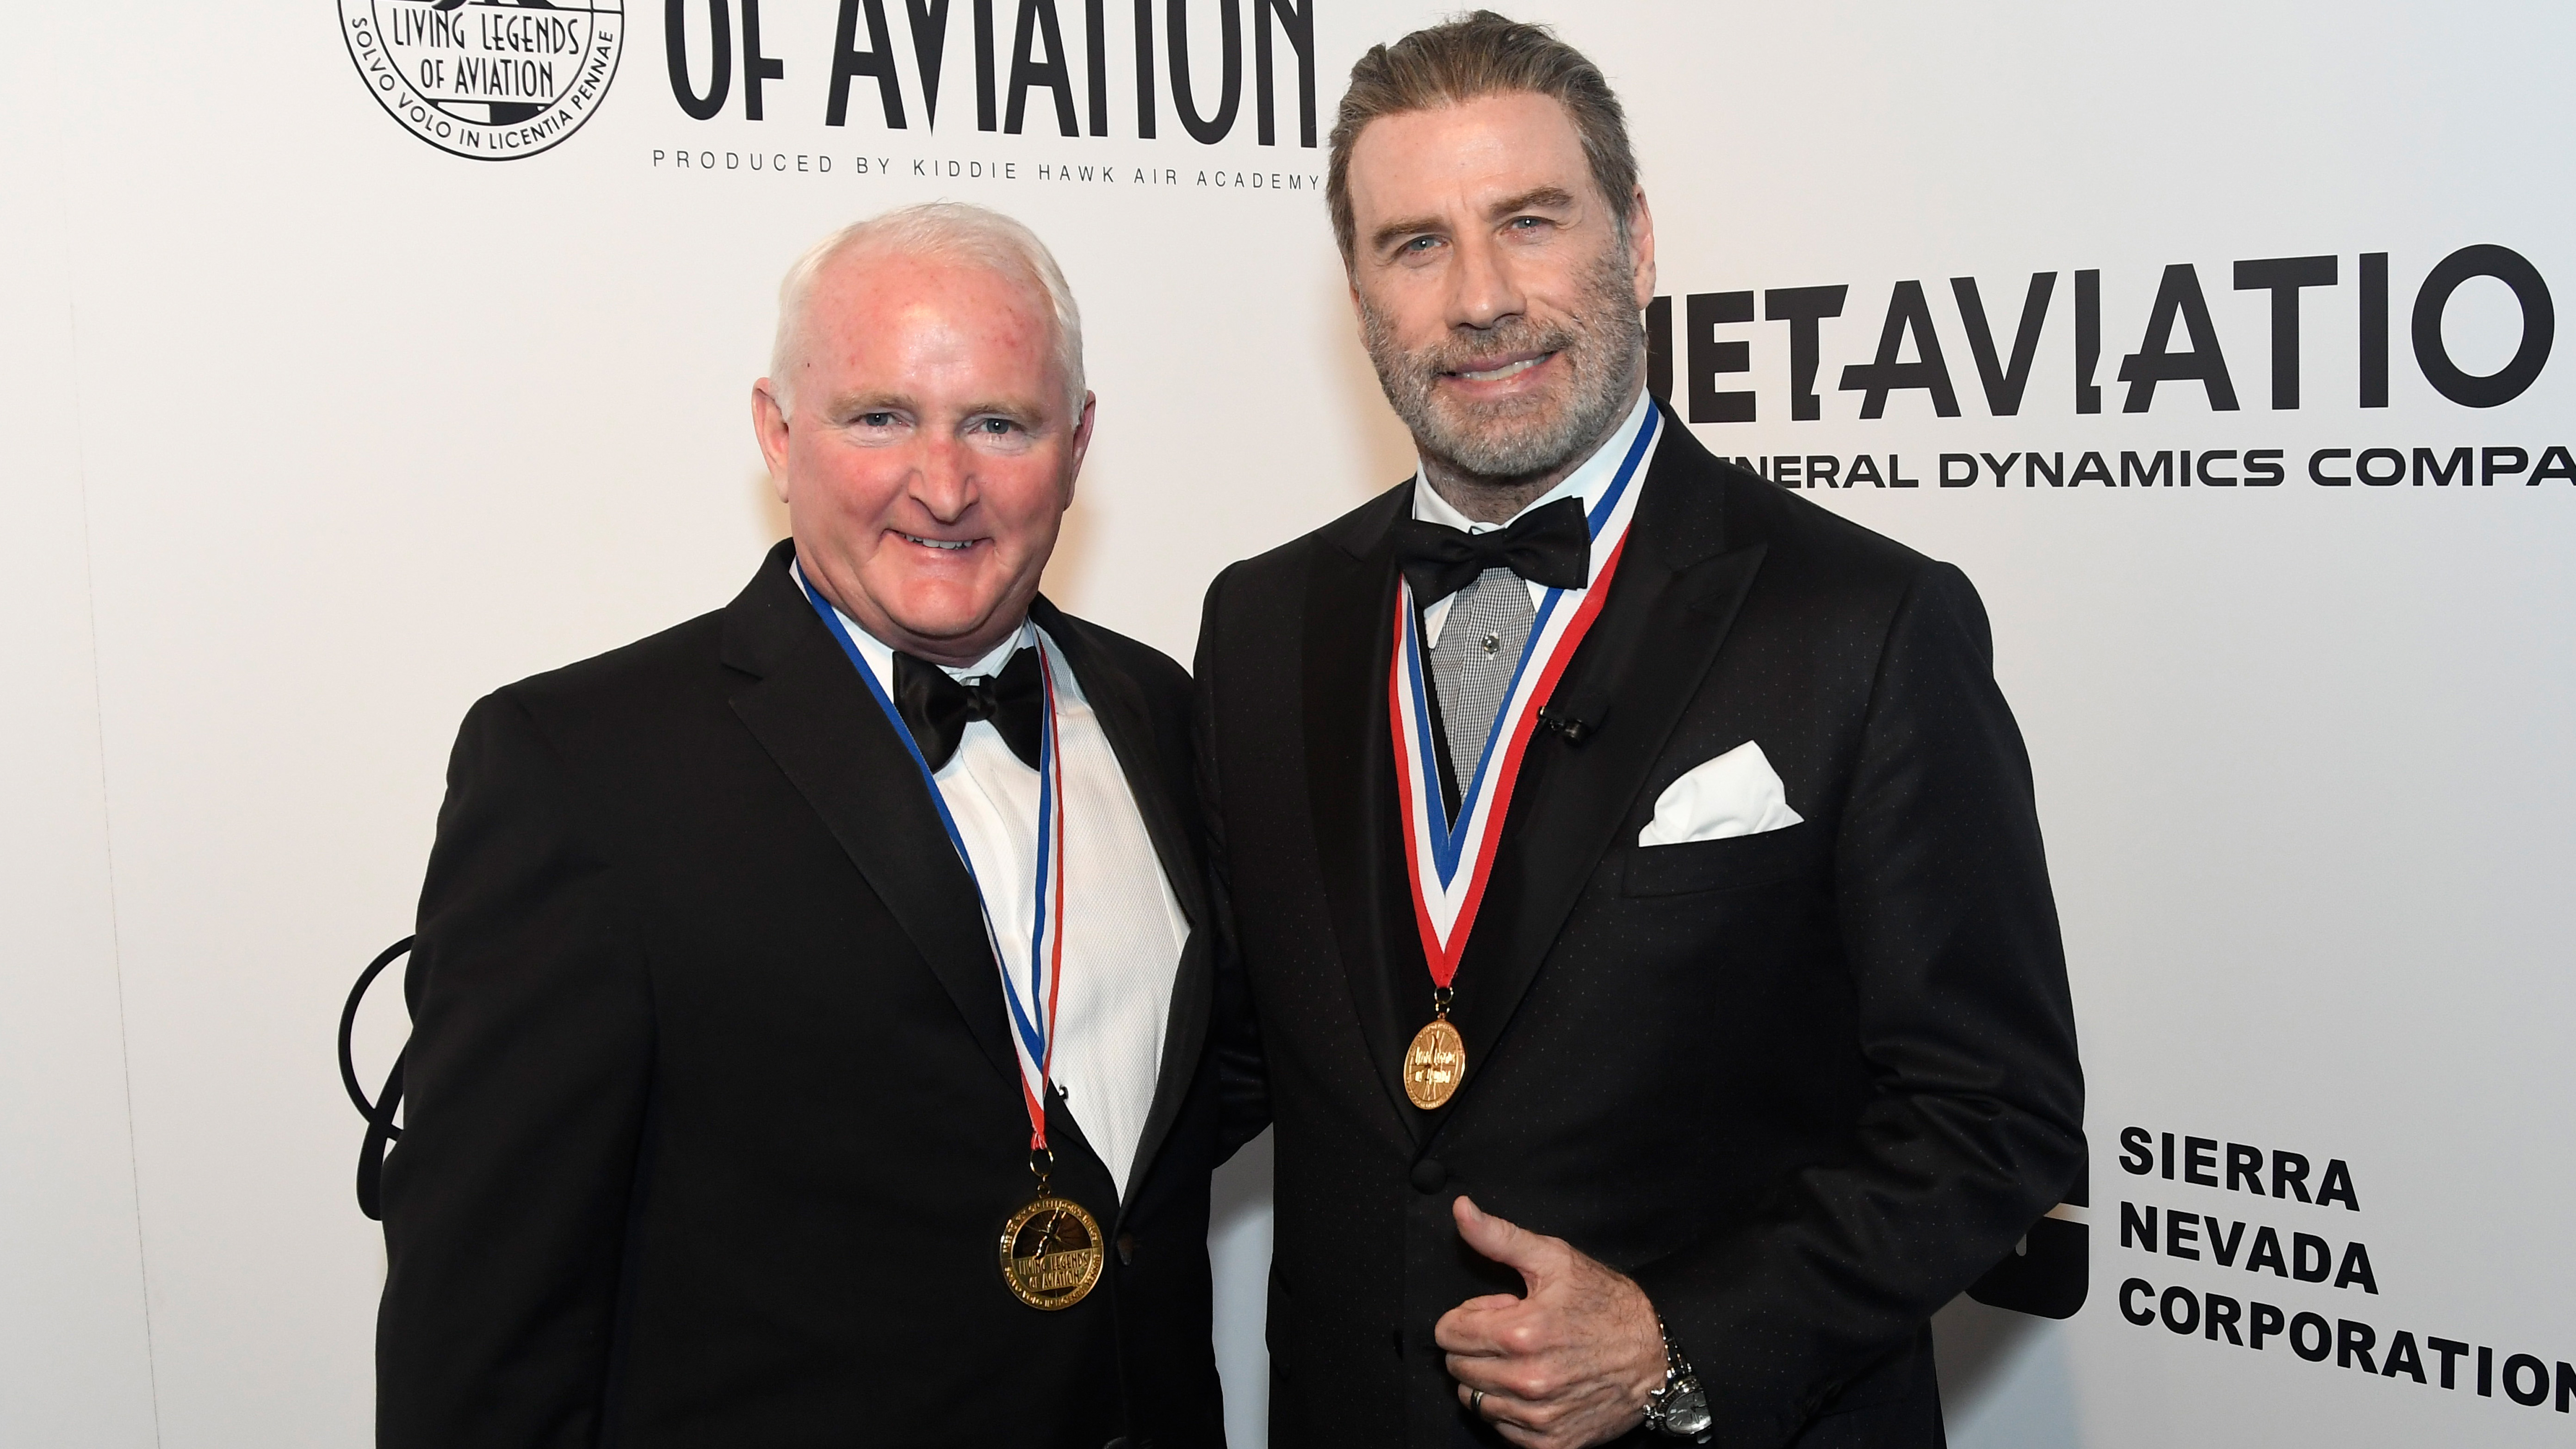 AOPA President Mark Baker with actor and pilot John Travolta at the fifteenth annual Awards for the Living Legends of Aviation on Jan. 19 in Beverly Hills, California. Photo Credits ©2018 Larry Grace Photography / Living Legends of Aviation.